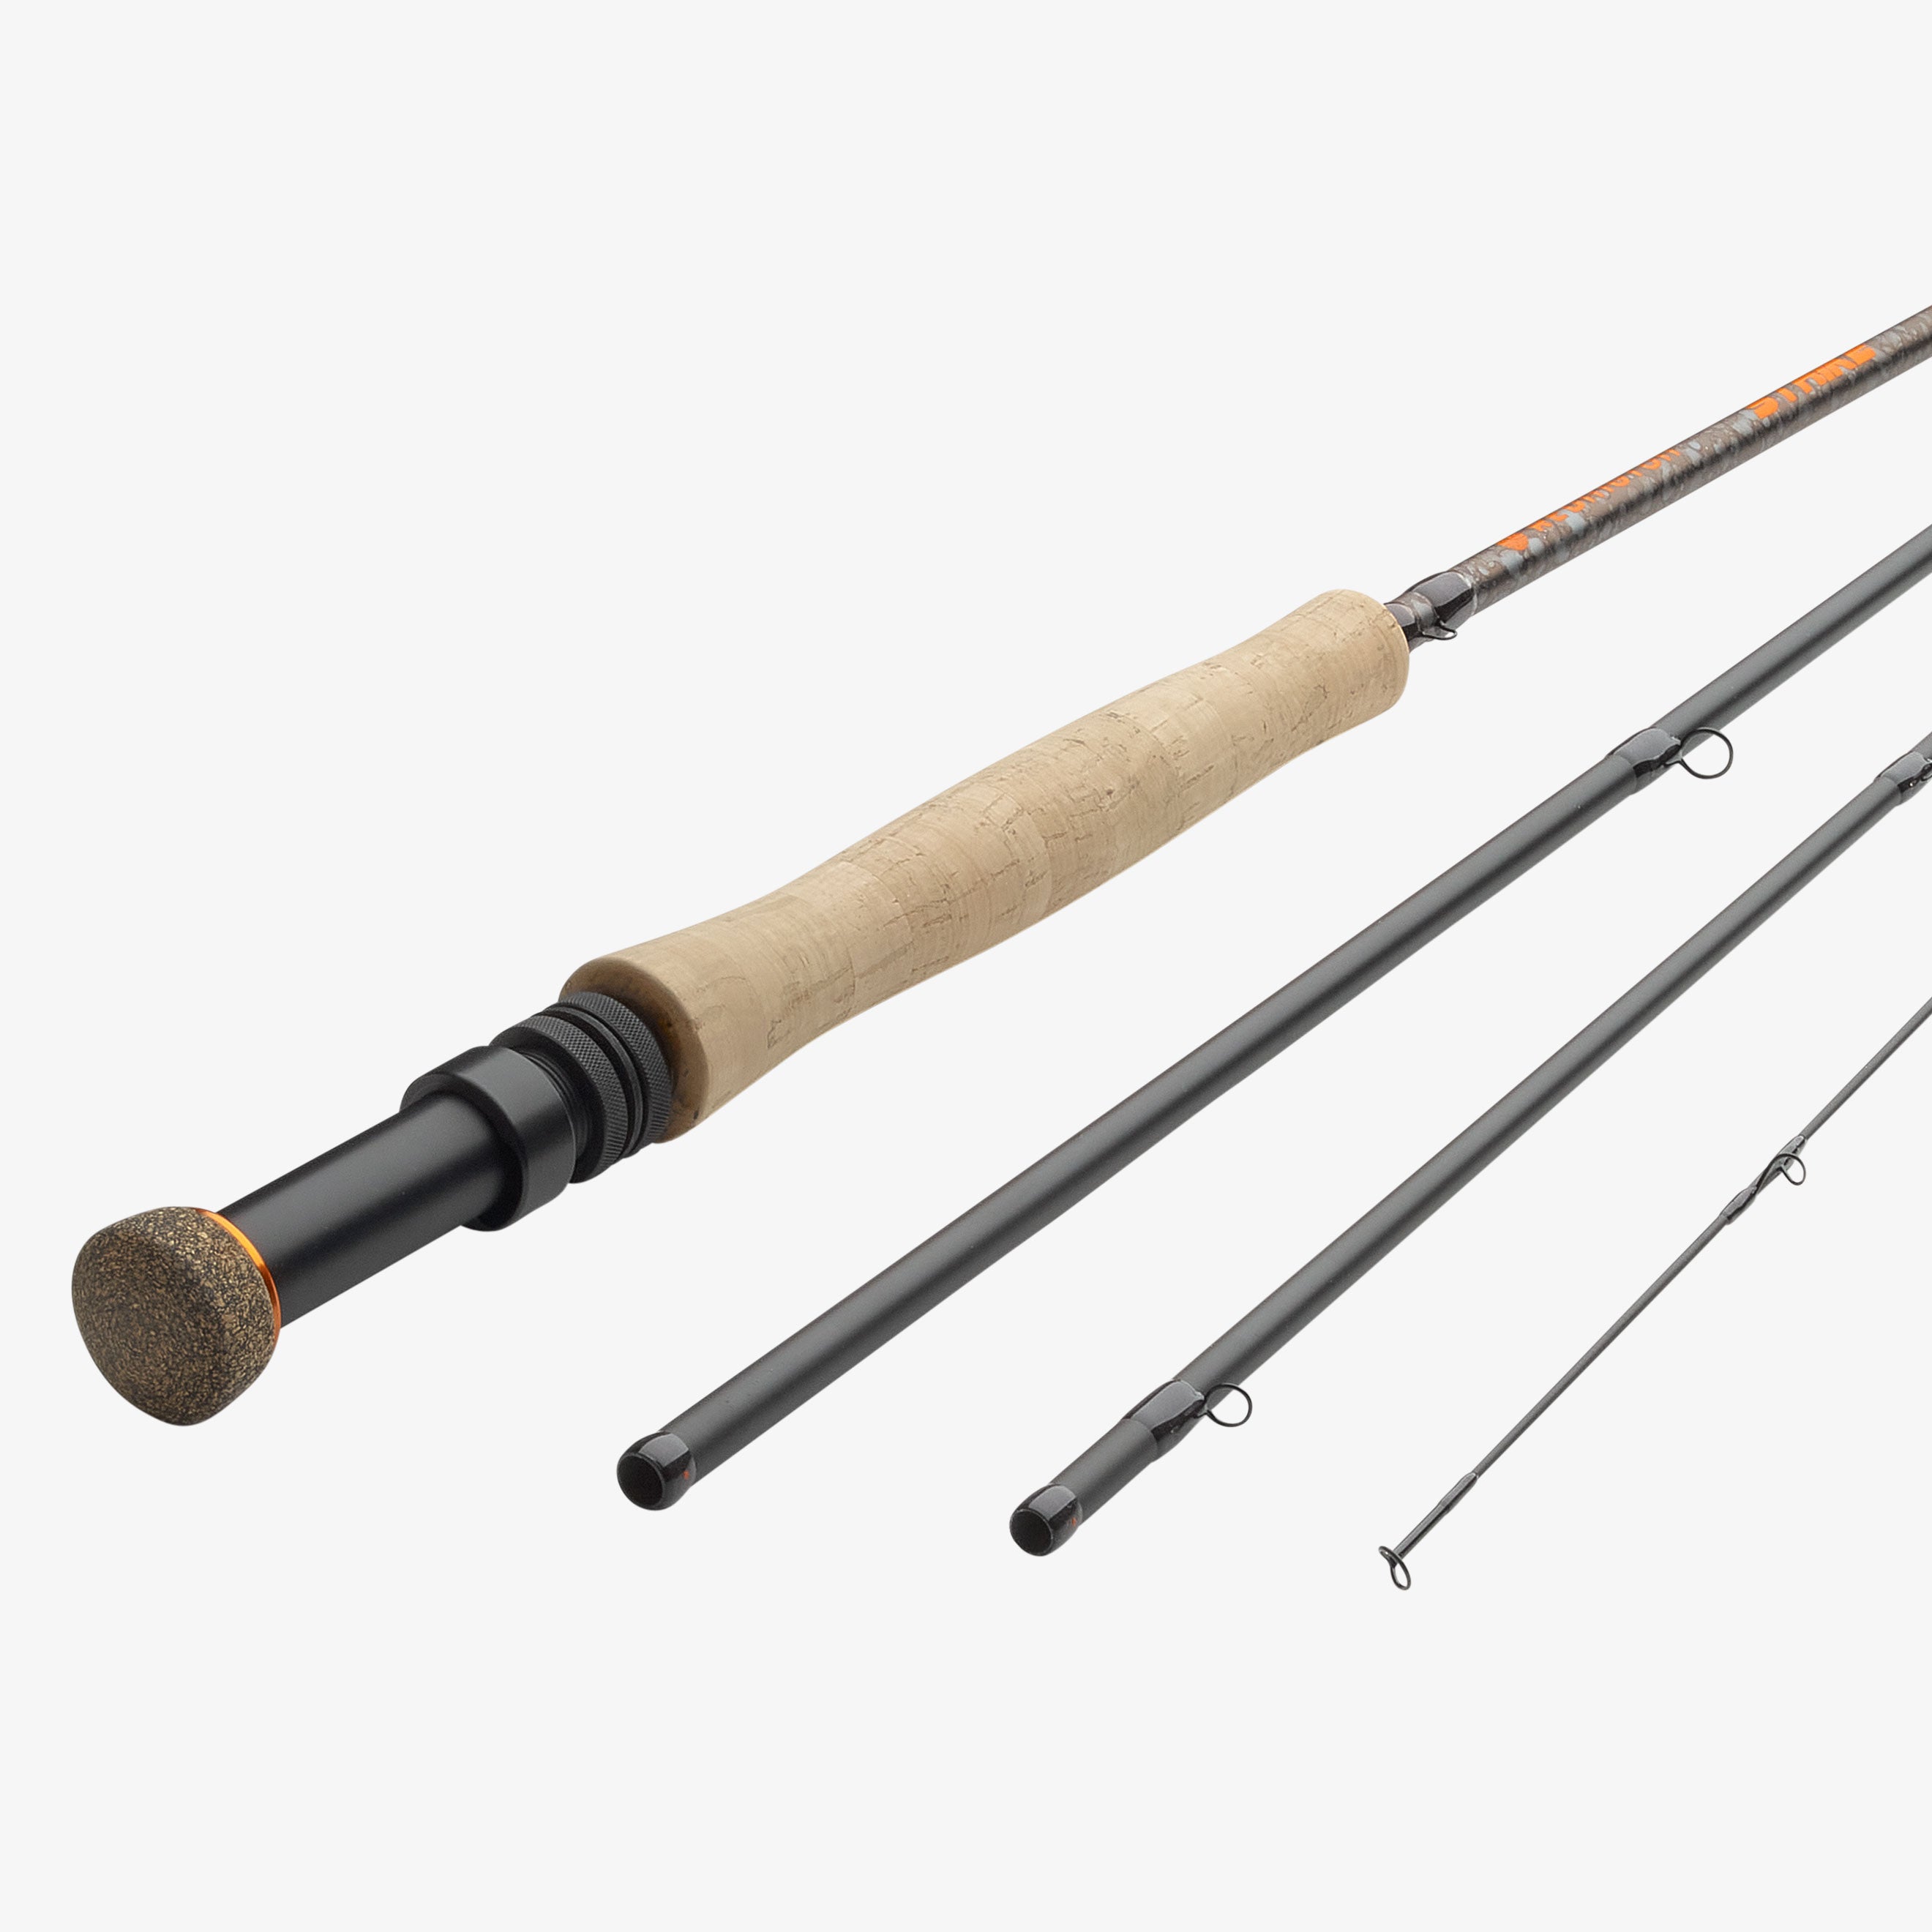 STRIKE Euro Nymphing Fly Fishing Rod 4 Weight, 10ft 6in